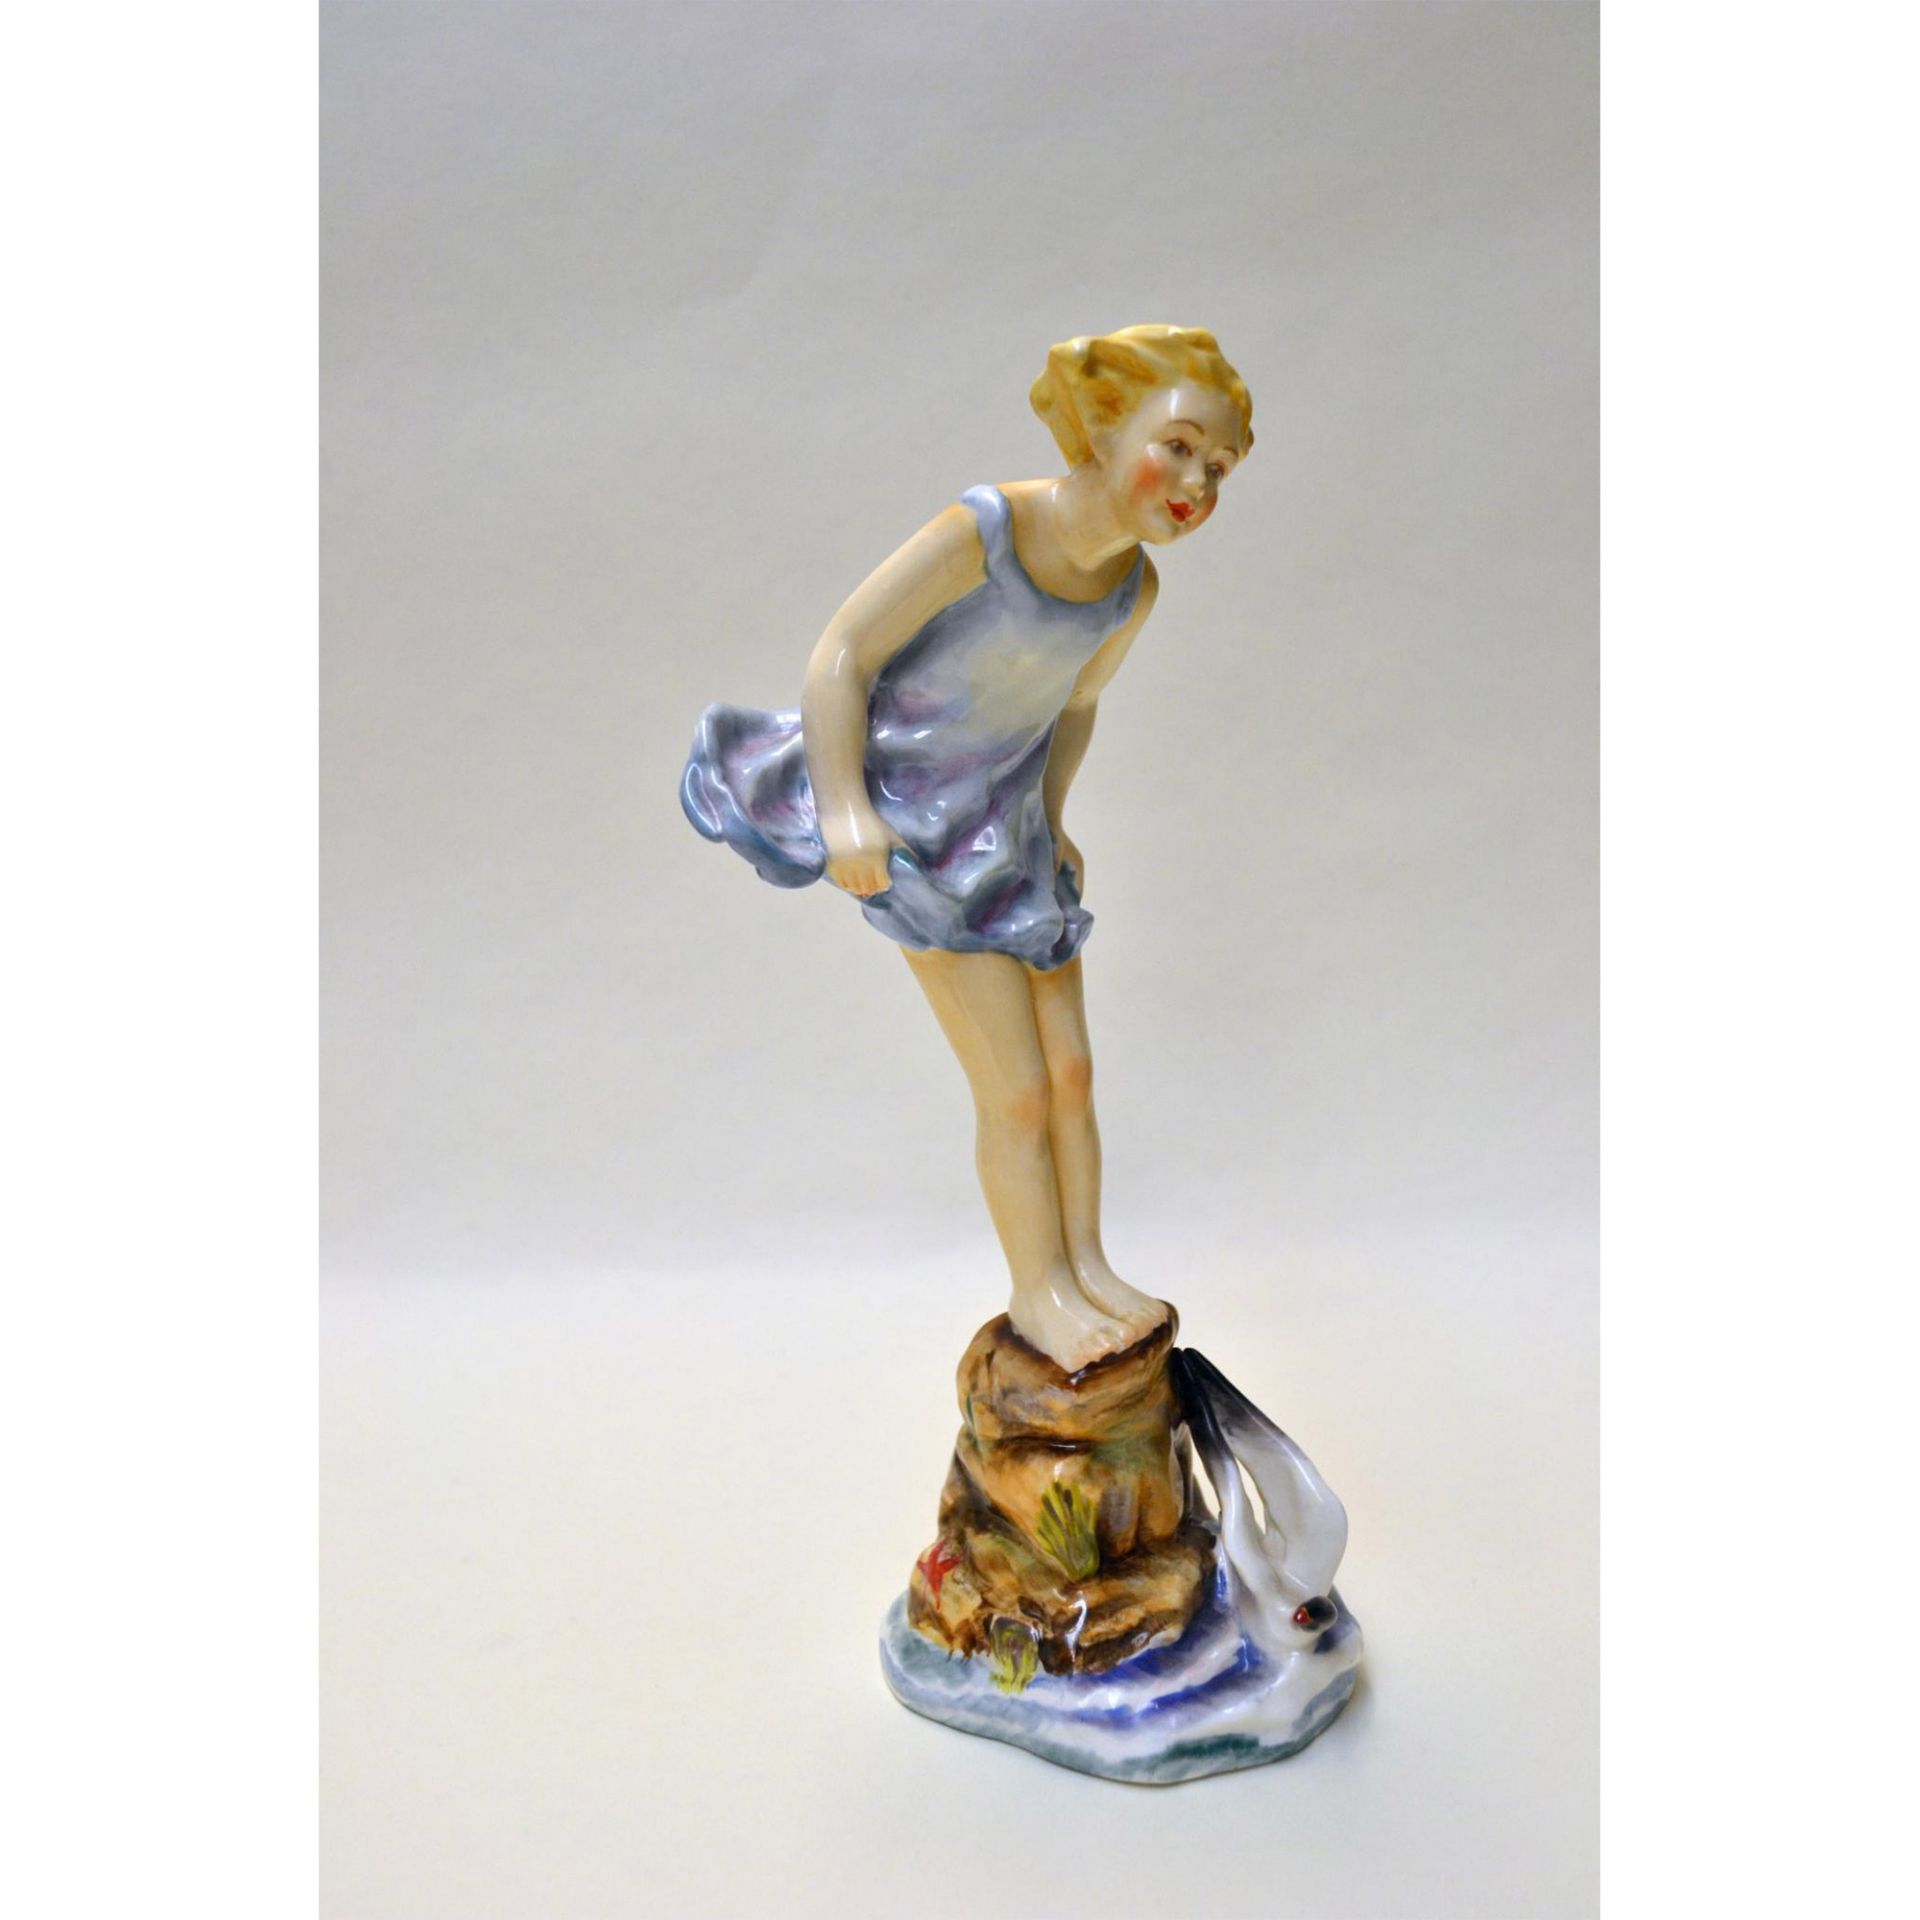 Royal Worcester Porcelain Sea Breeze Girl Figurine, Puce Mark, F.G.Doughty - Image 3 of 6